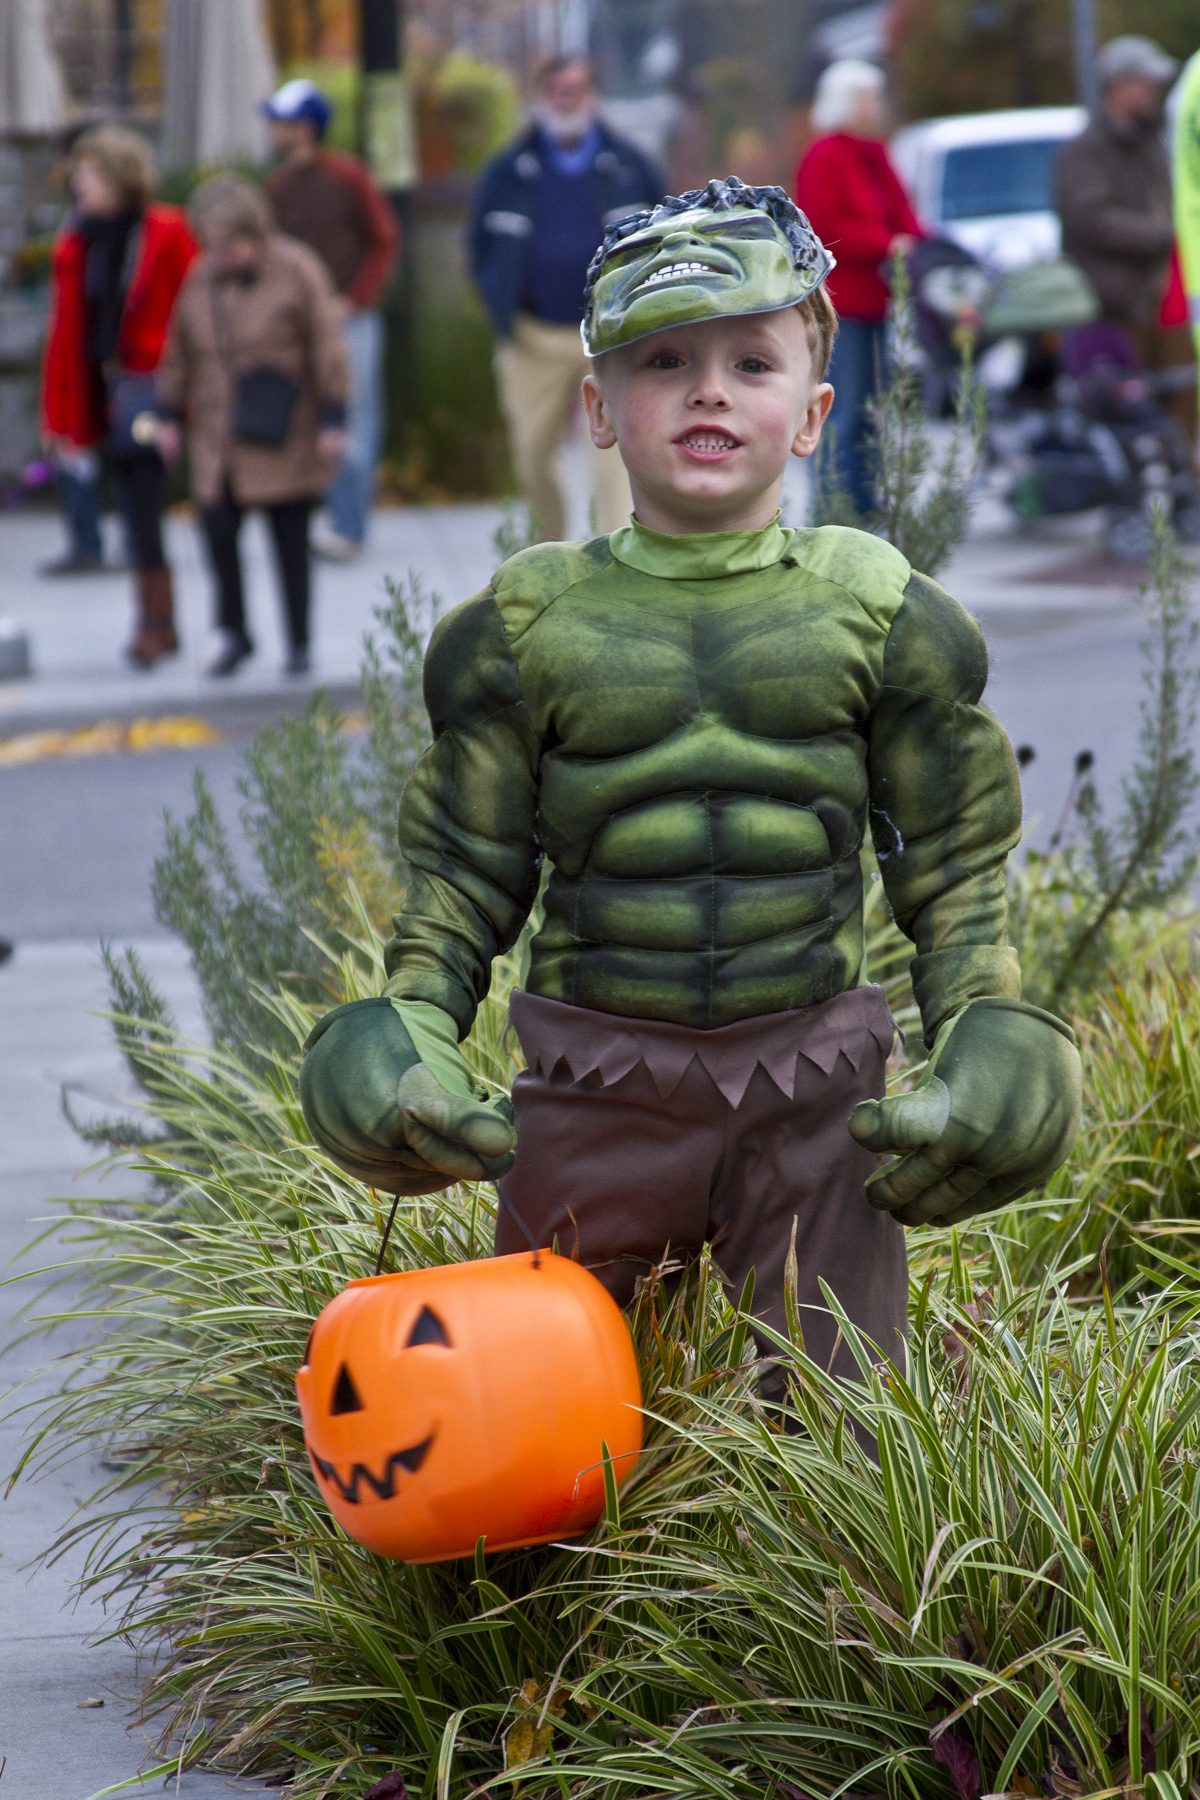  One young trick-or-treater, dressed as the Incredible Hulk, takes a quick break to pose during the 2013 downtown Winslow Trick Or Treat event on Bainbridge Island.&nbsp; 